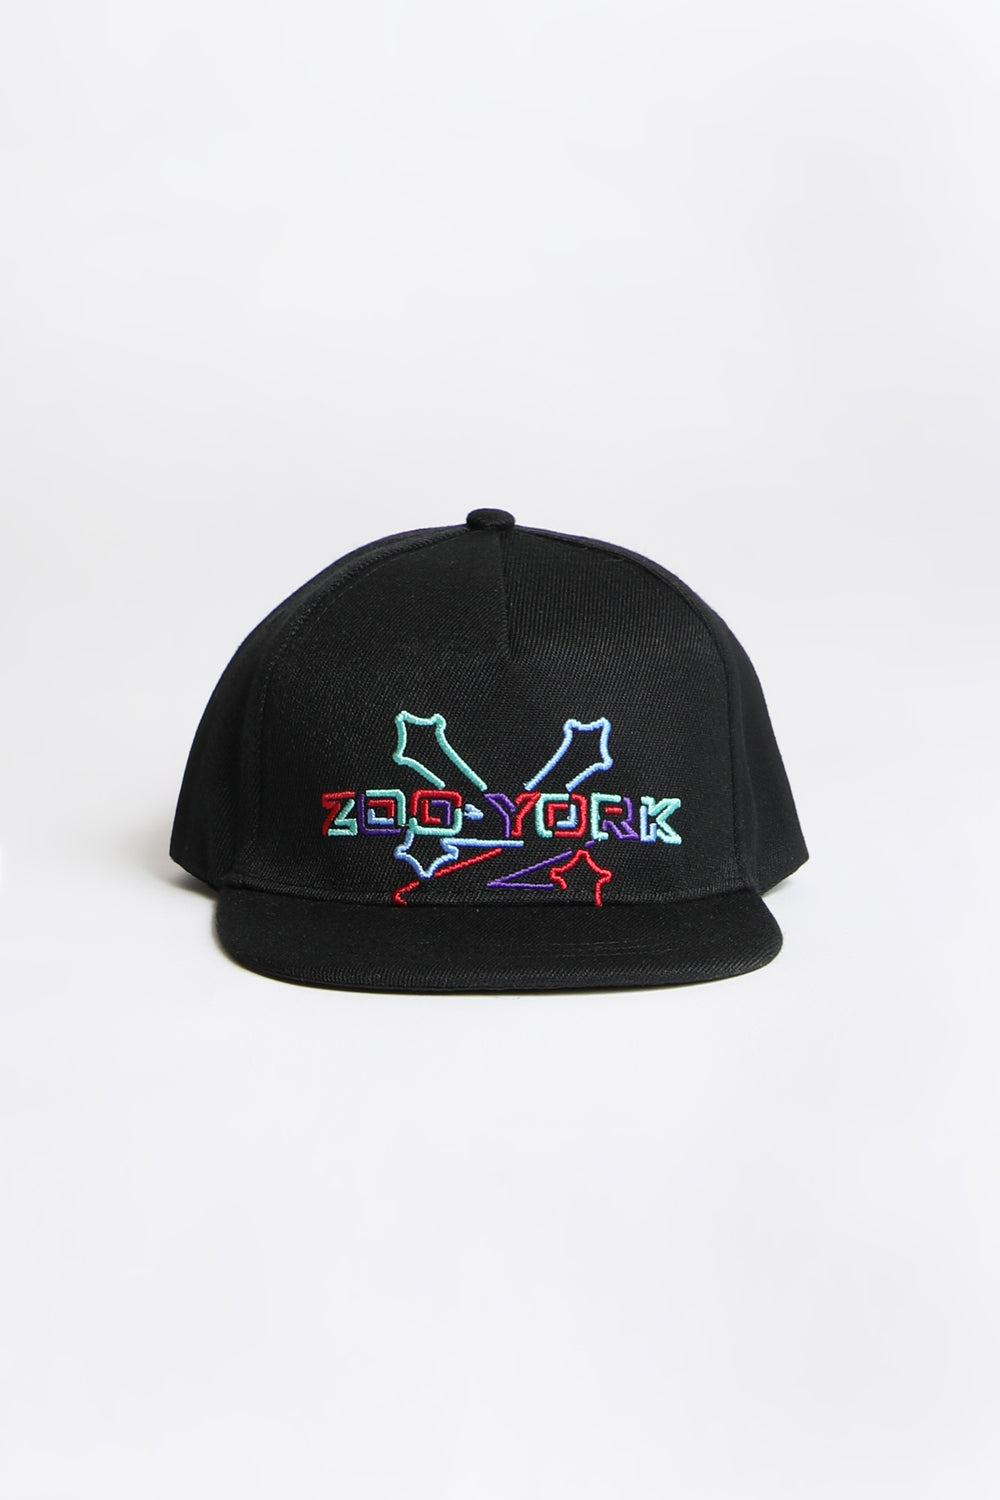 Zoo York Youth Embroidered Logo Flat Brim Hat Zoo York Youth Embroidered Logo Flat Brim Hat